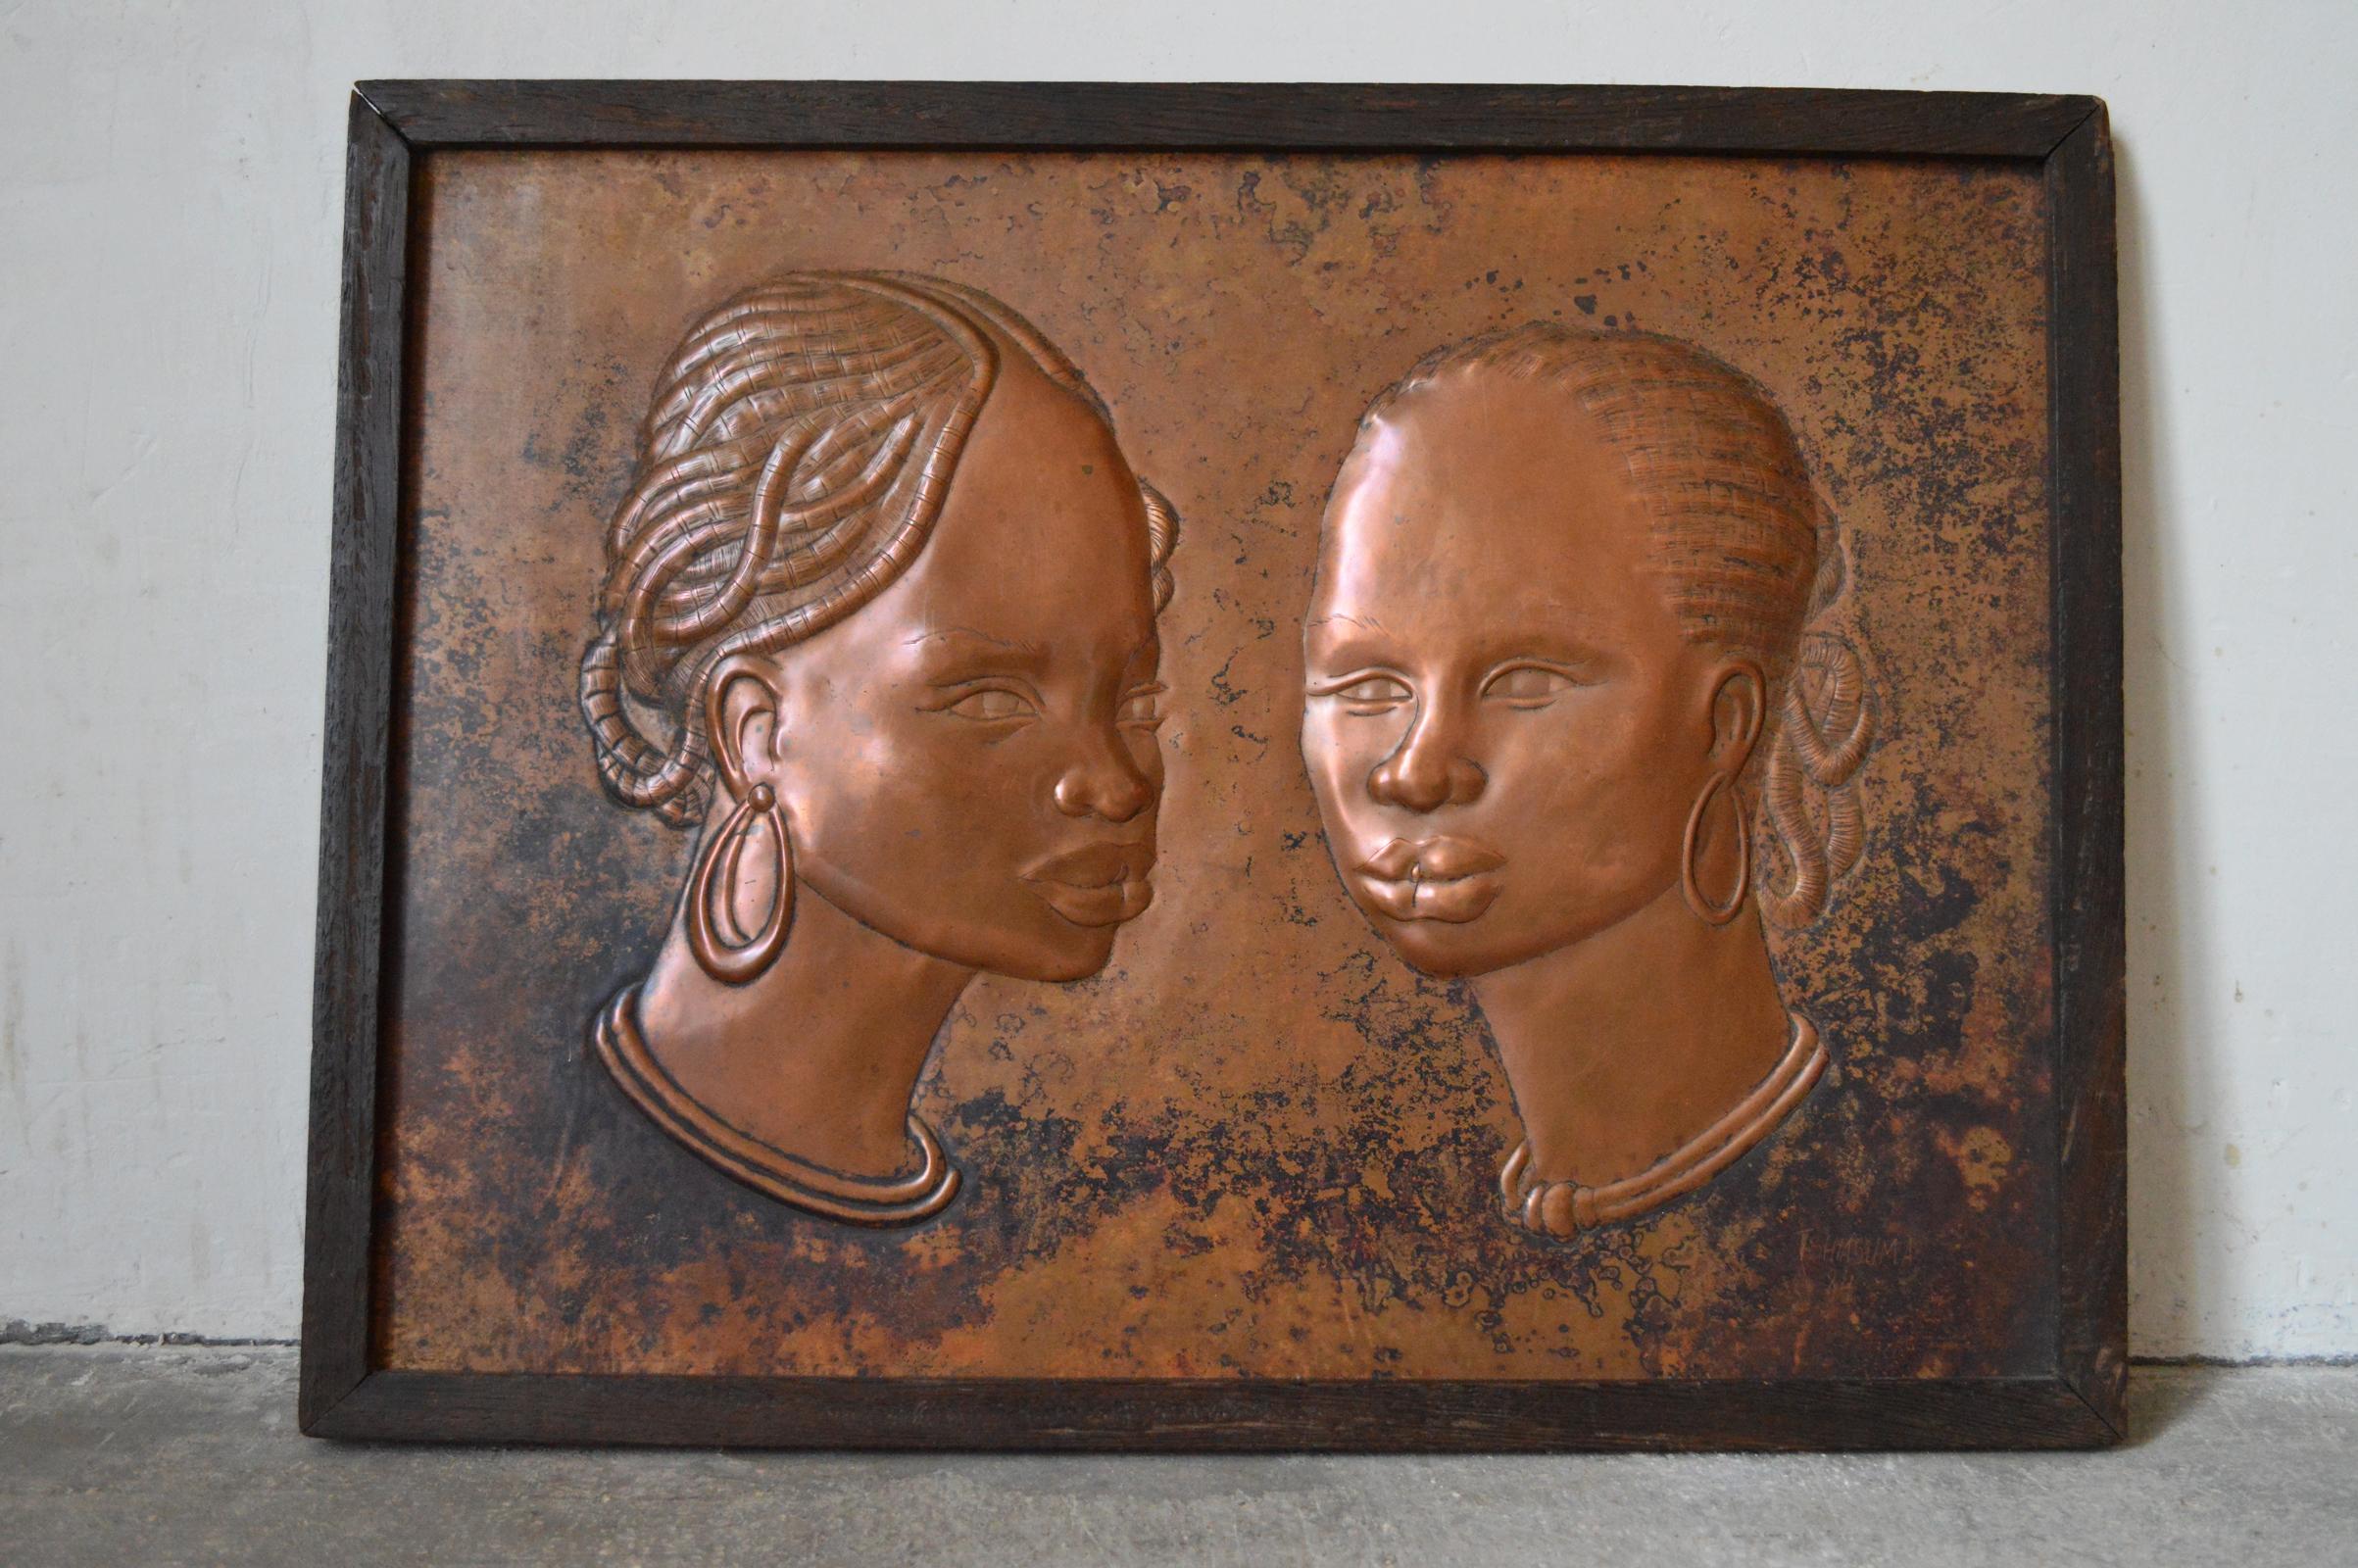 Original copper panel representing two women's faces.
Handmade brassware work by an African artist.

Art Deco Colonial style, Africa, 80s.
Signed and dated: 